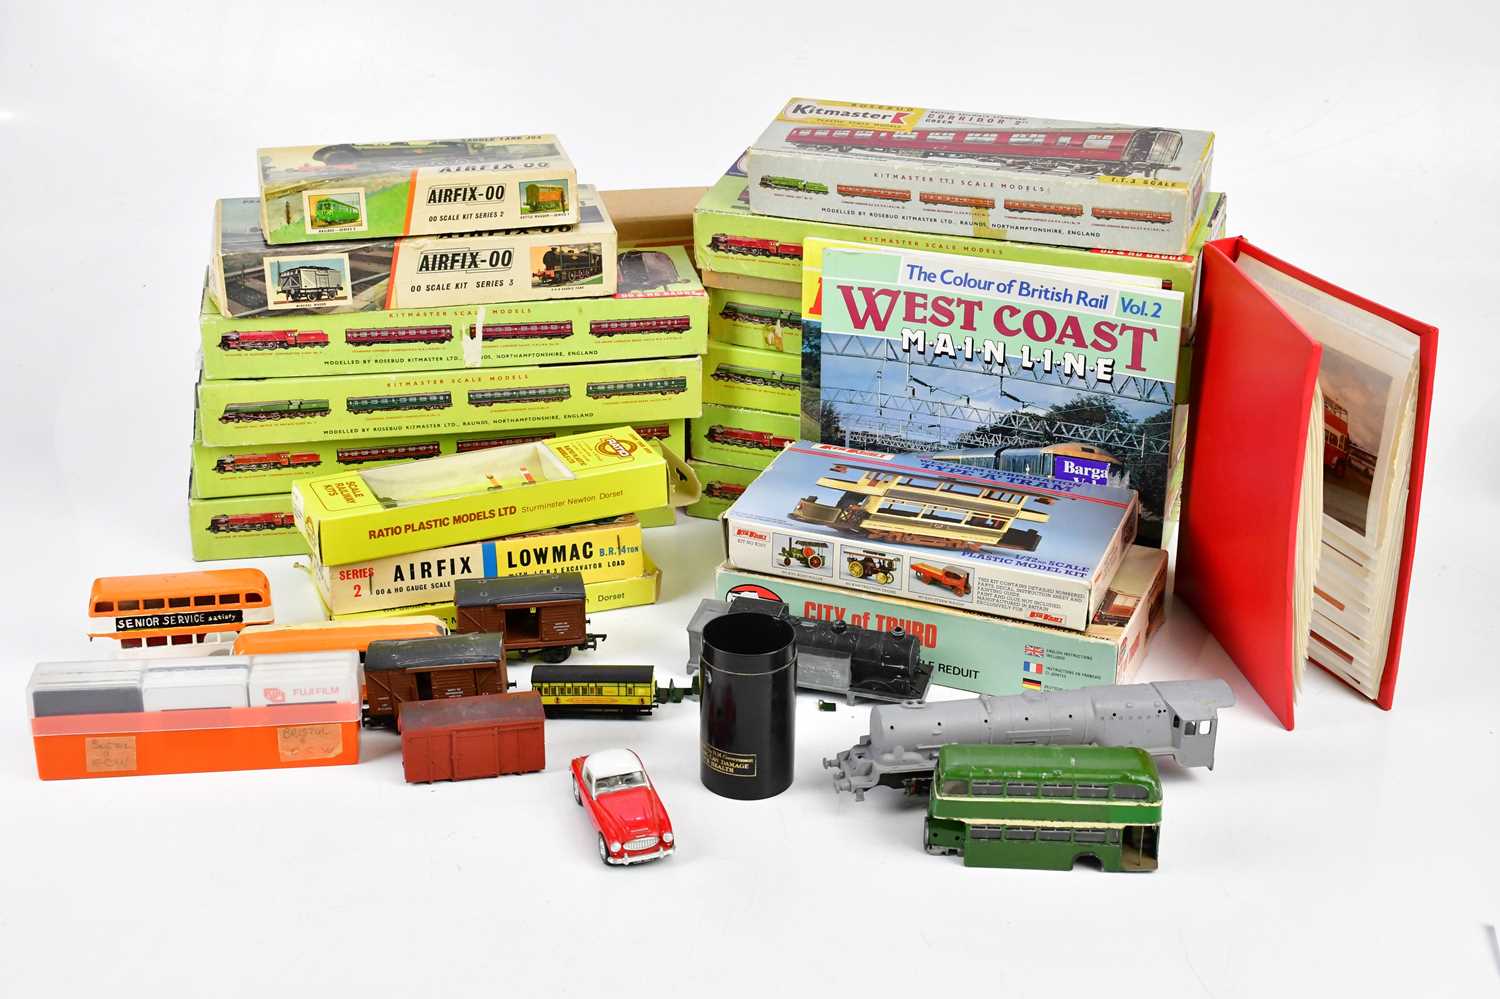 KITMASTER; a collection of train kits and rolling stock including 'Corridor 2nd' green and maroon